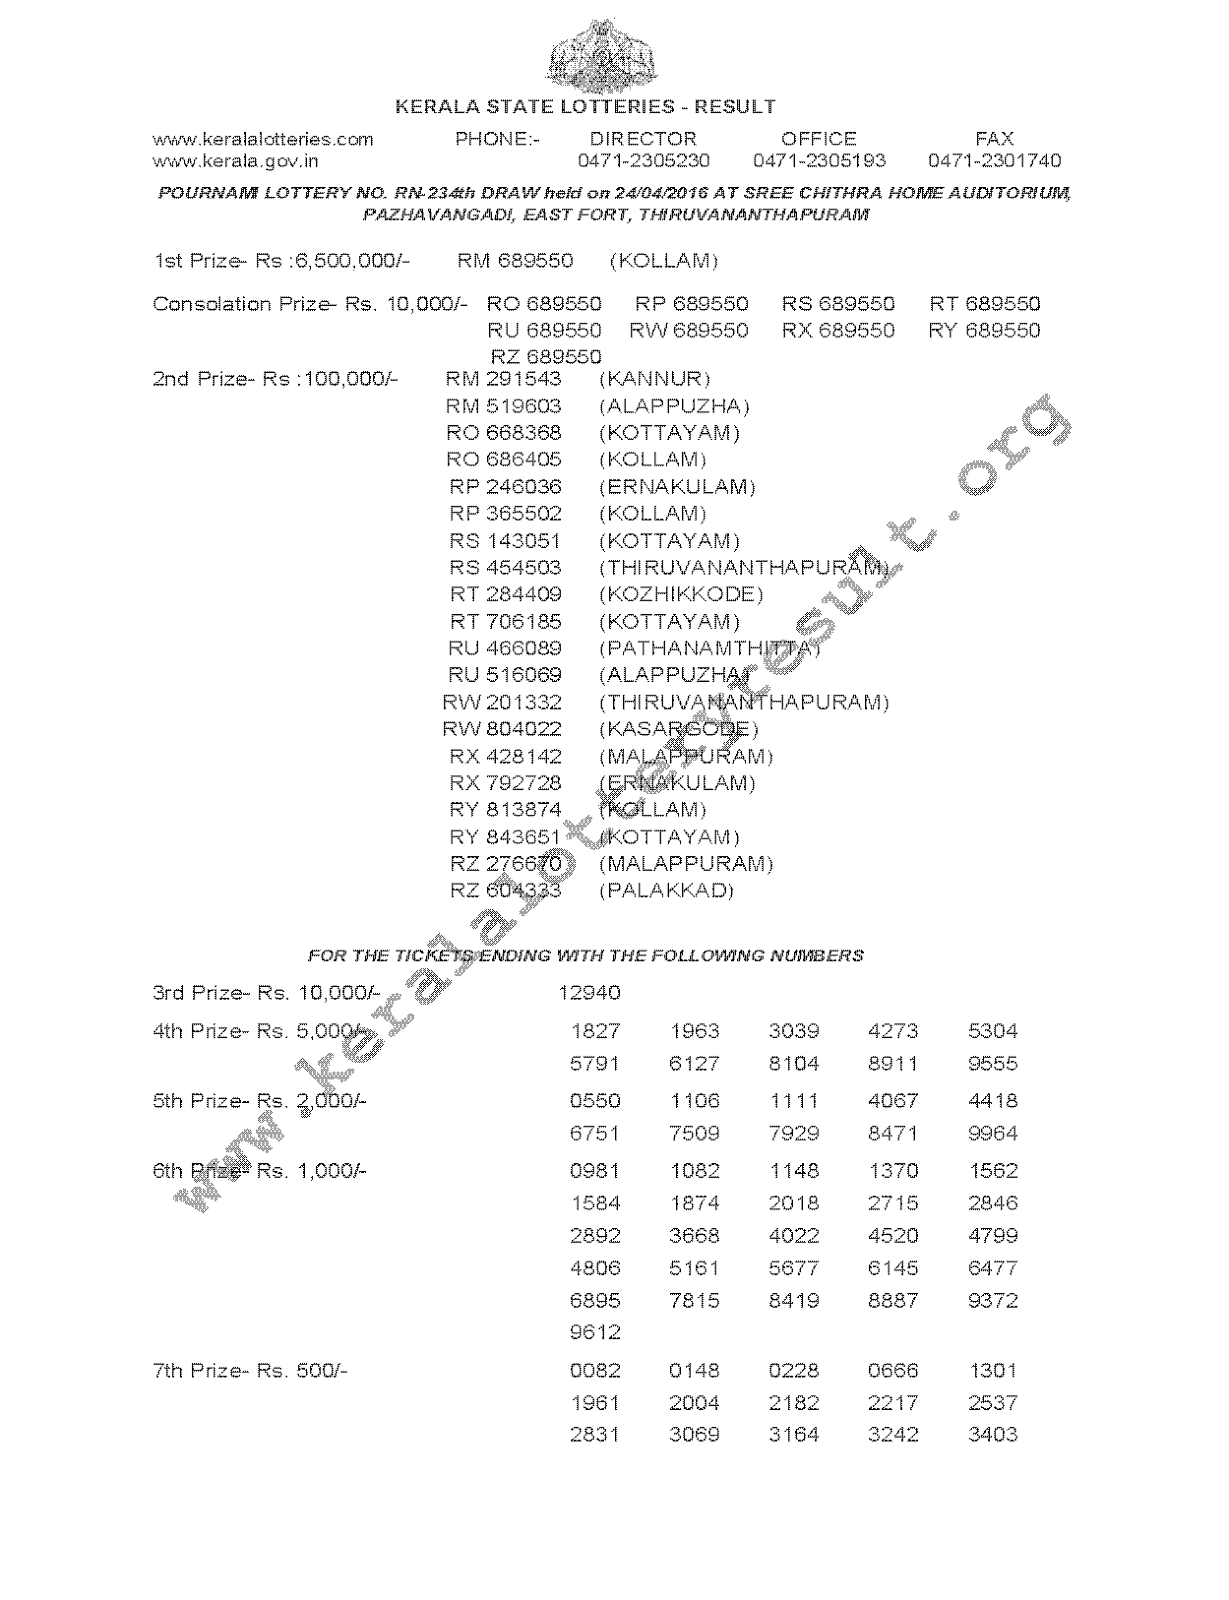 POURNAMI Lottery RN 234 Result 24-4-2016